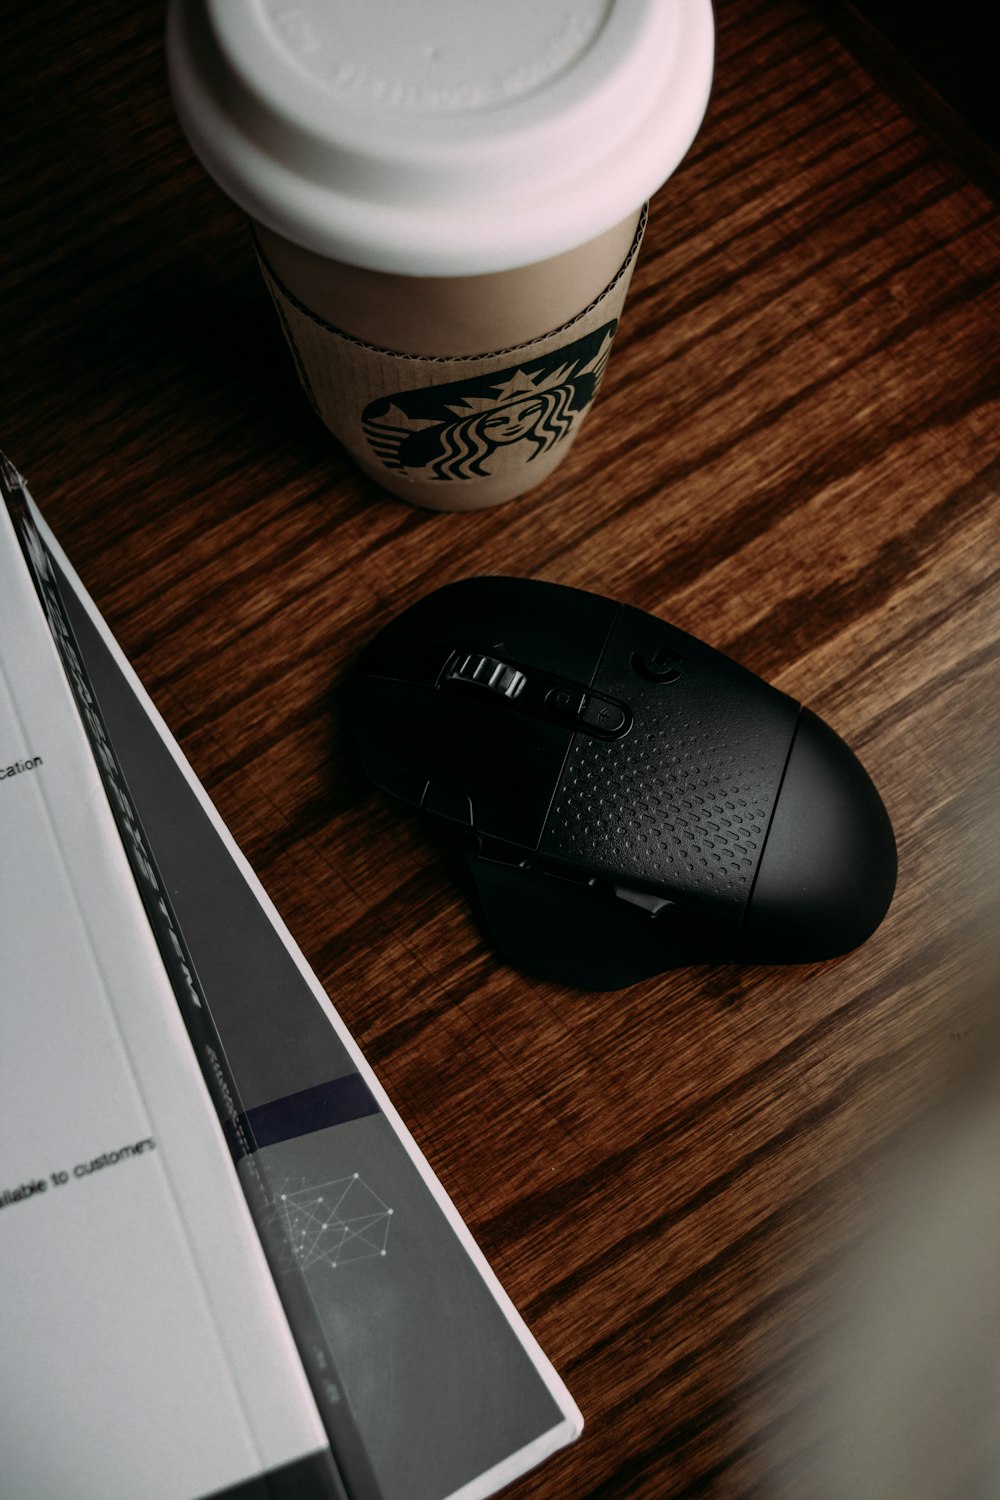 black and gray logitech cordless computer mouse beside white and green starbucks cup